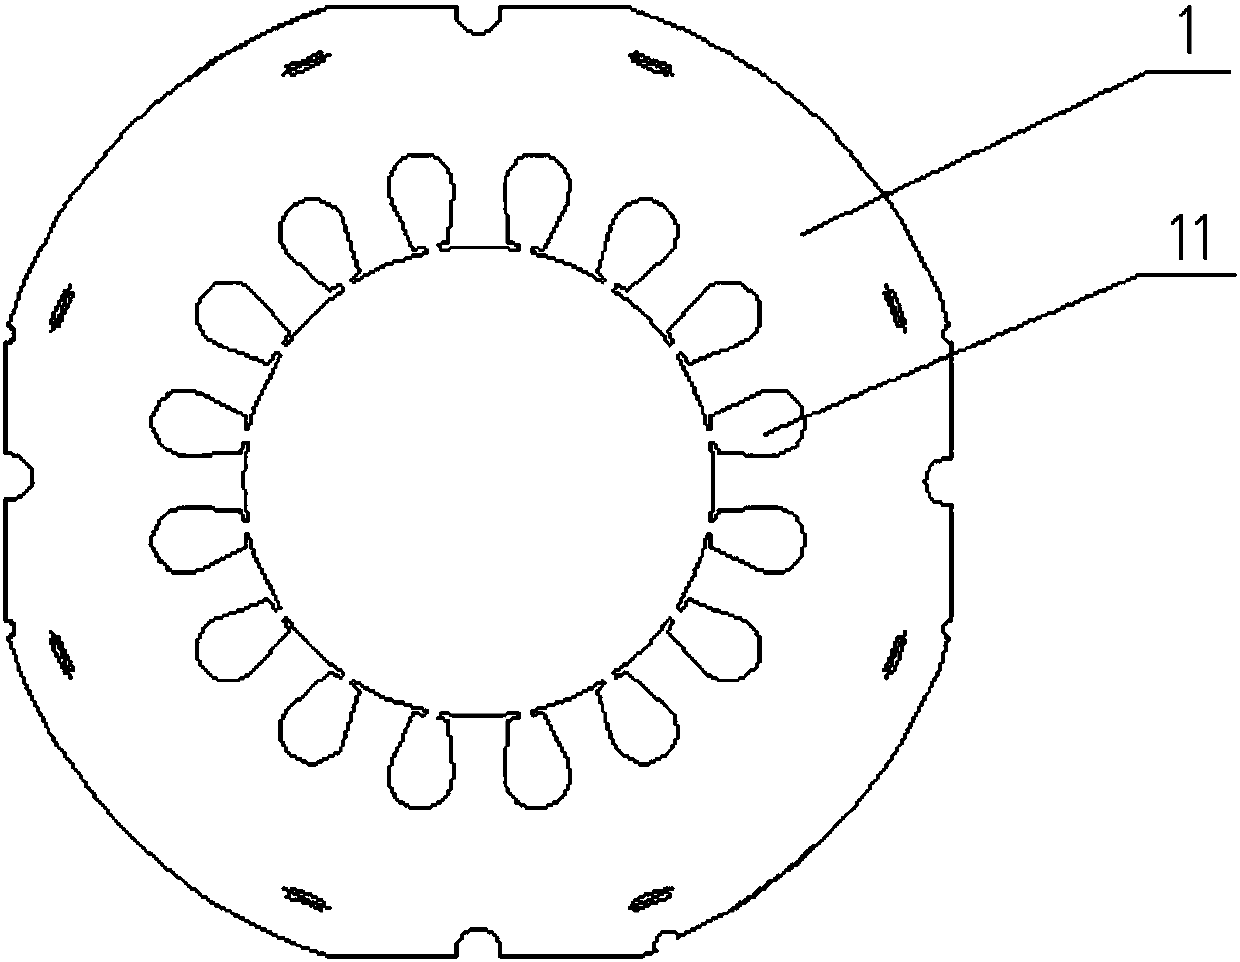 Motor stator core structure